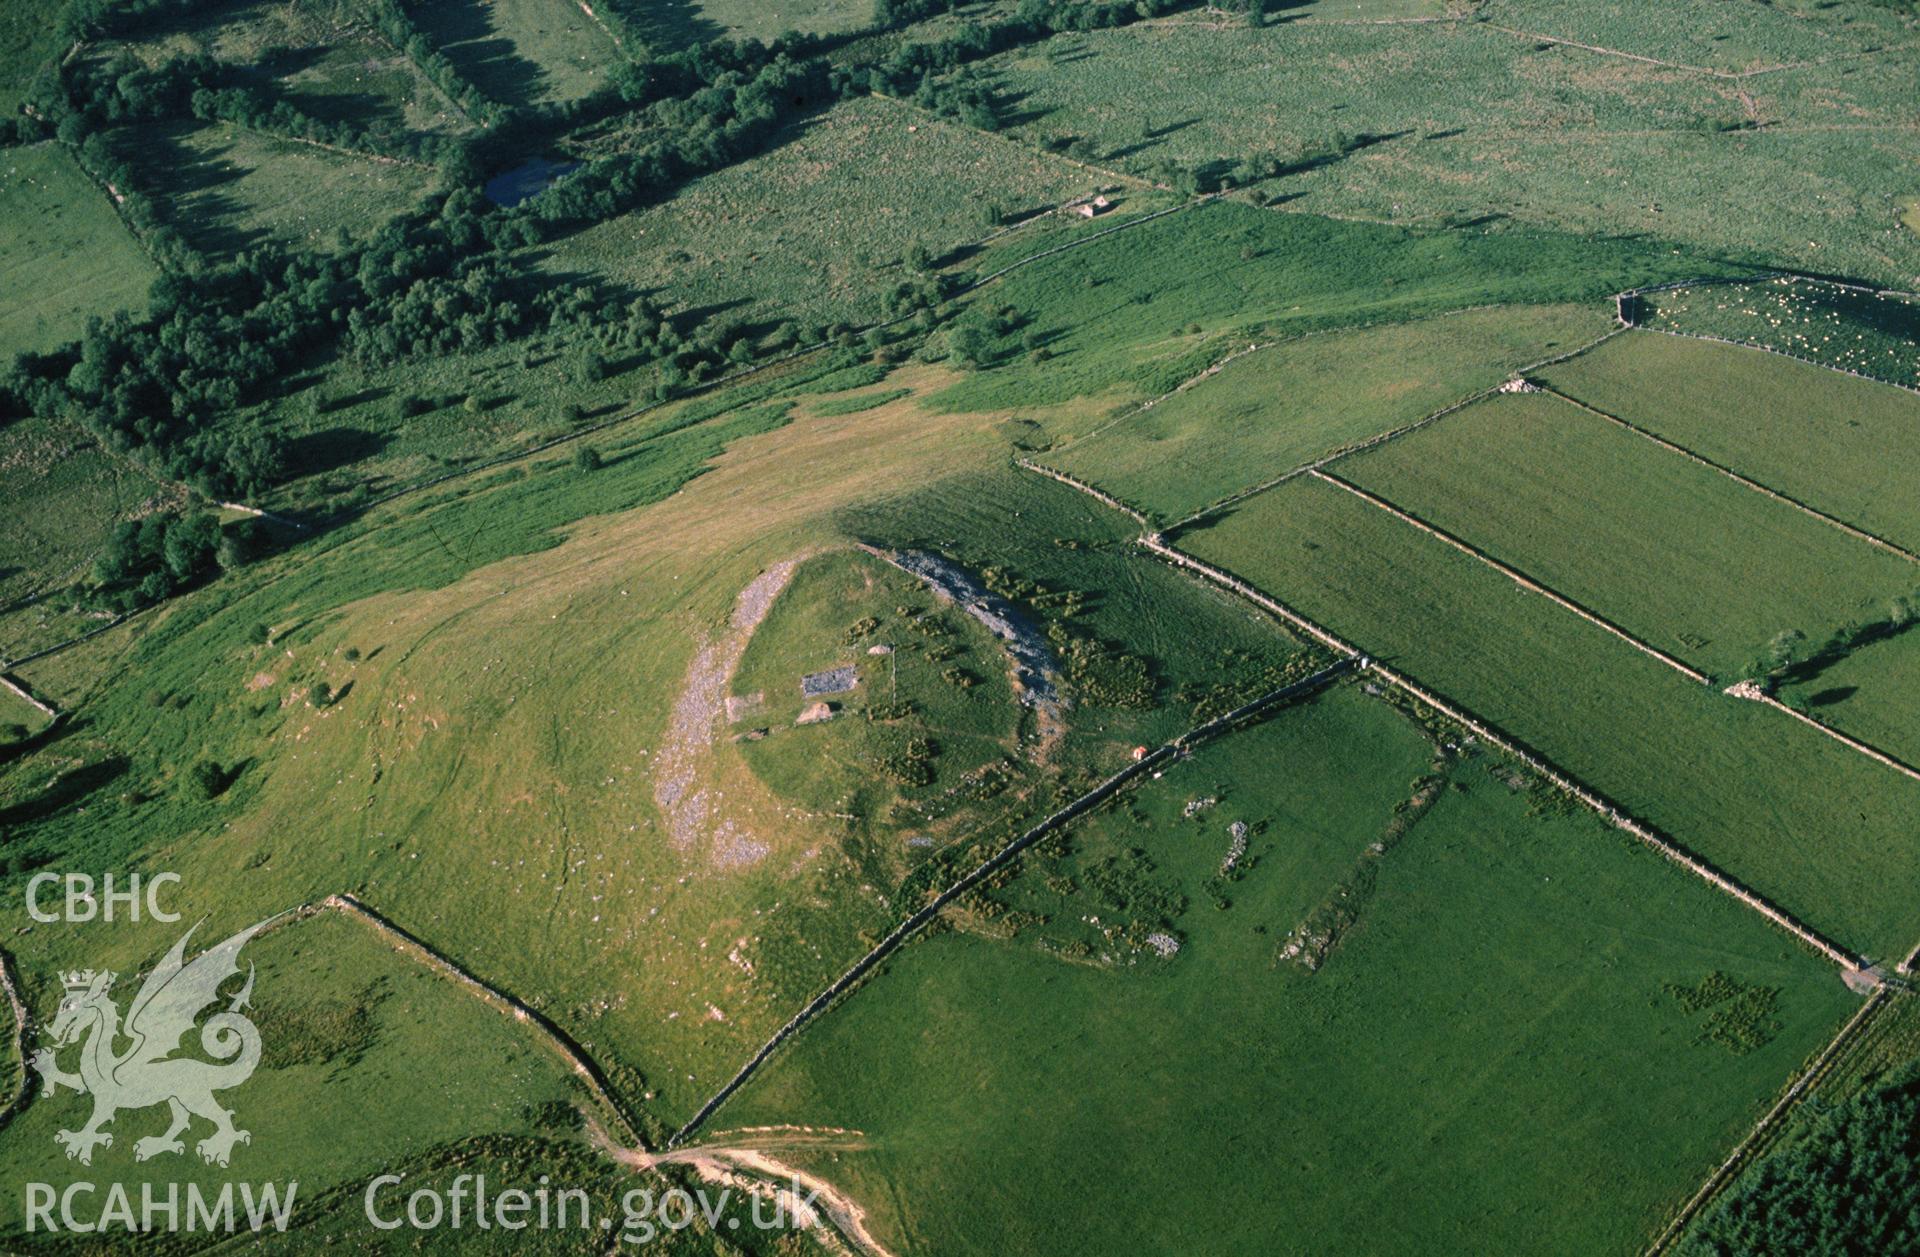 Slide of RCAHMW colour oblique aerial photograph of Caer Cadwgan, taken by C.R. Musson, 24/6/1989.